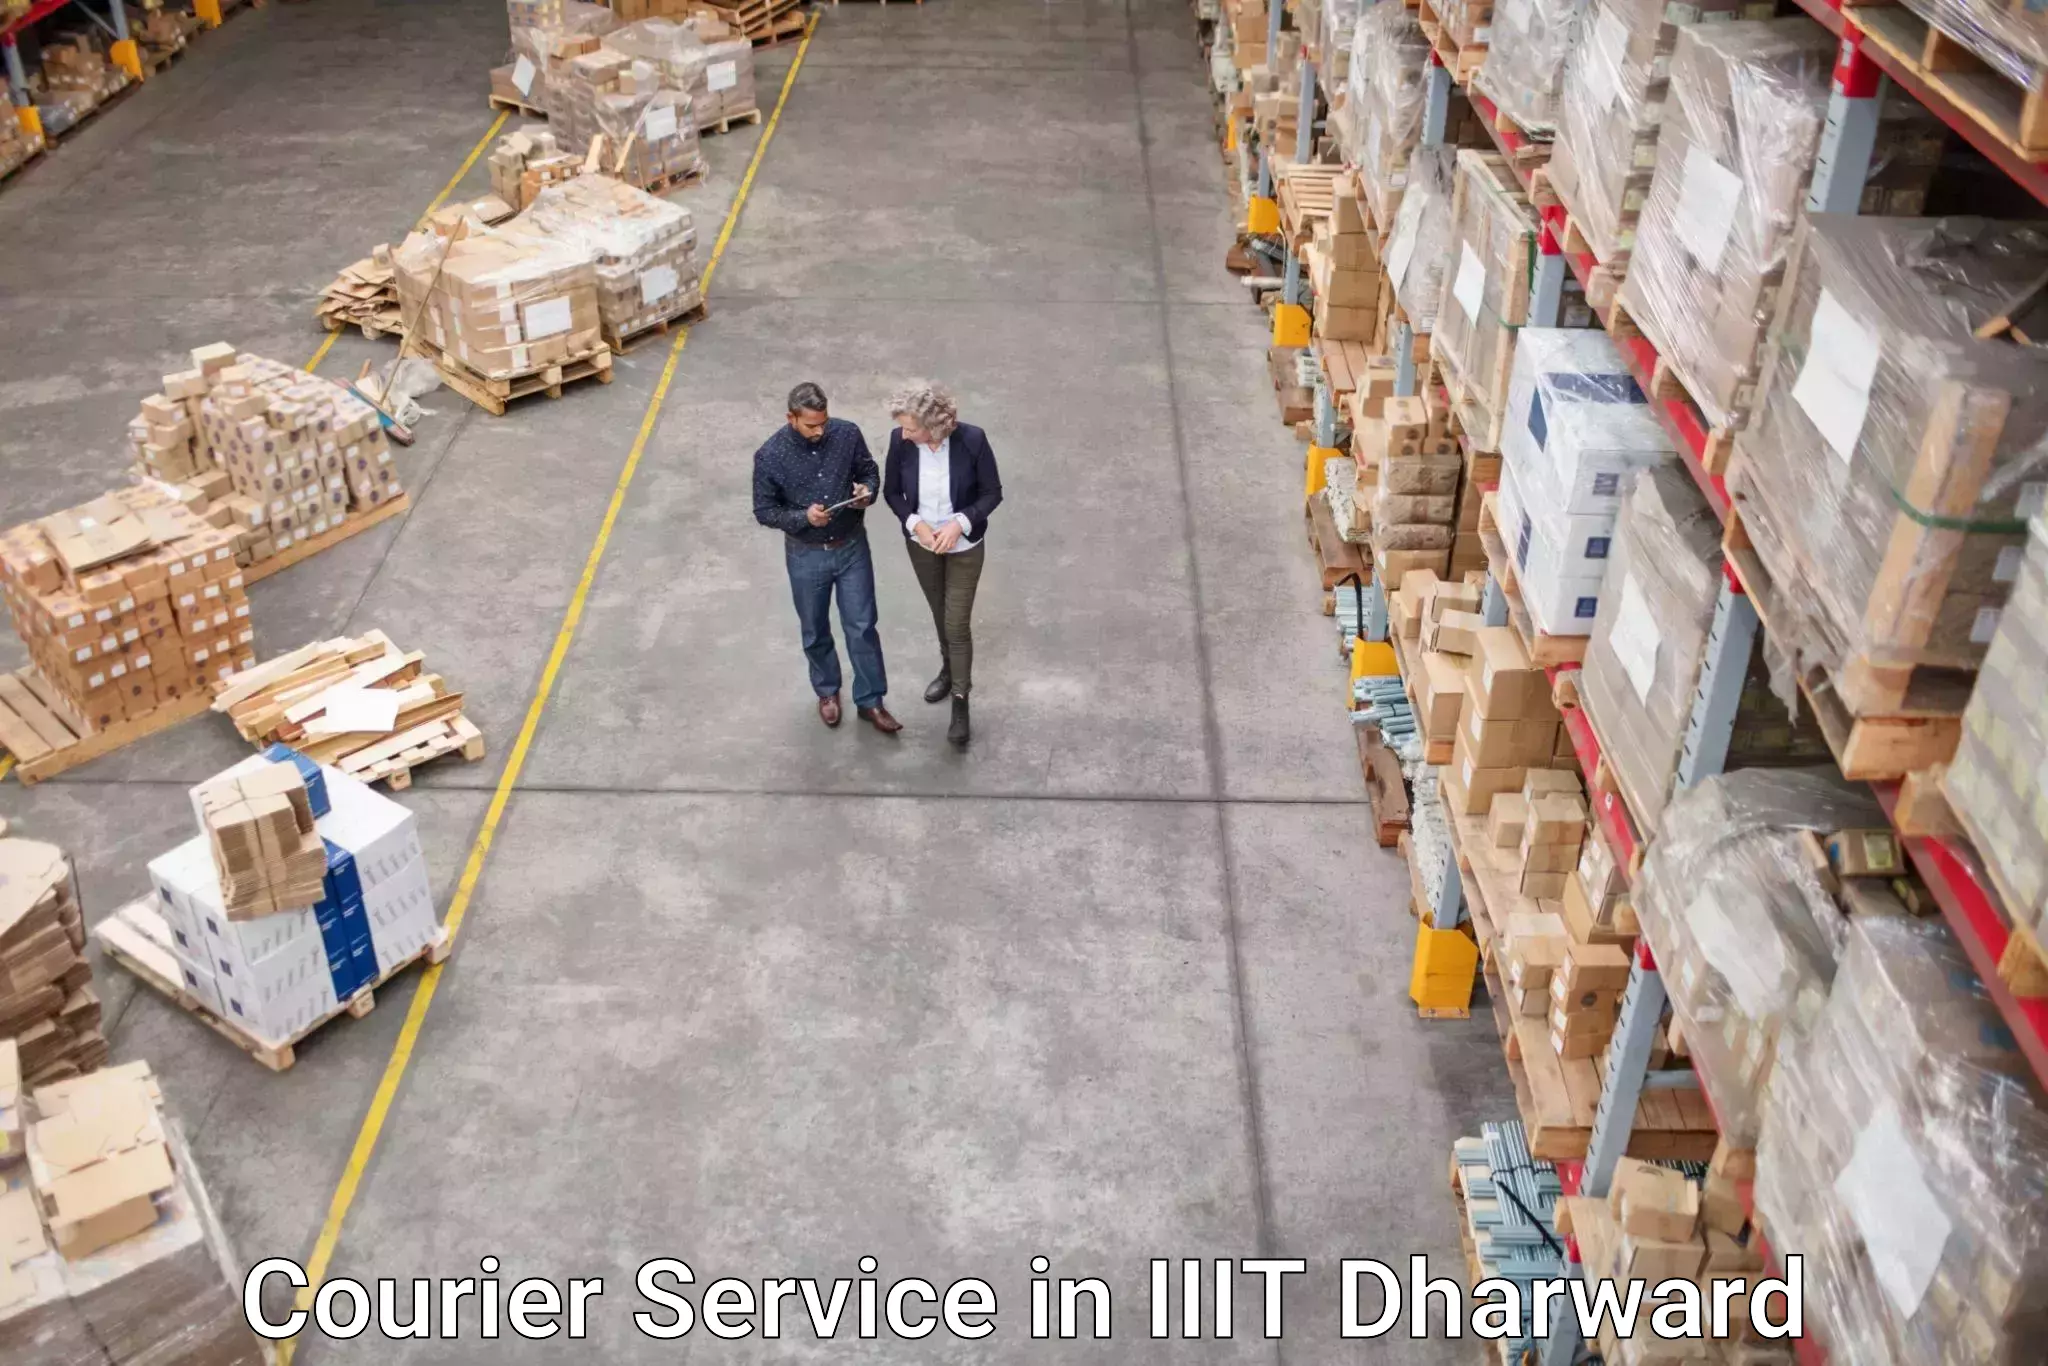 Express mail solutions in IIIT Dharward